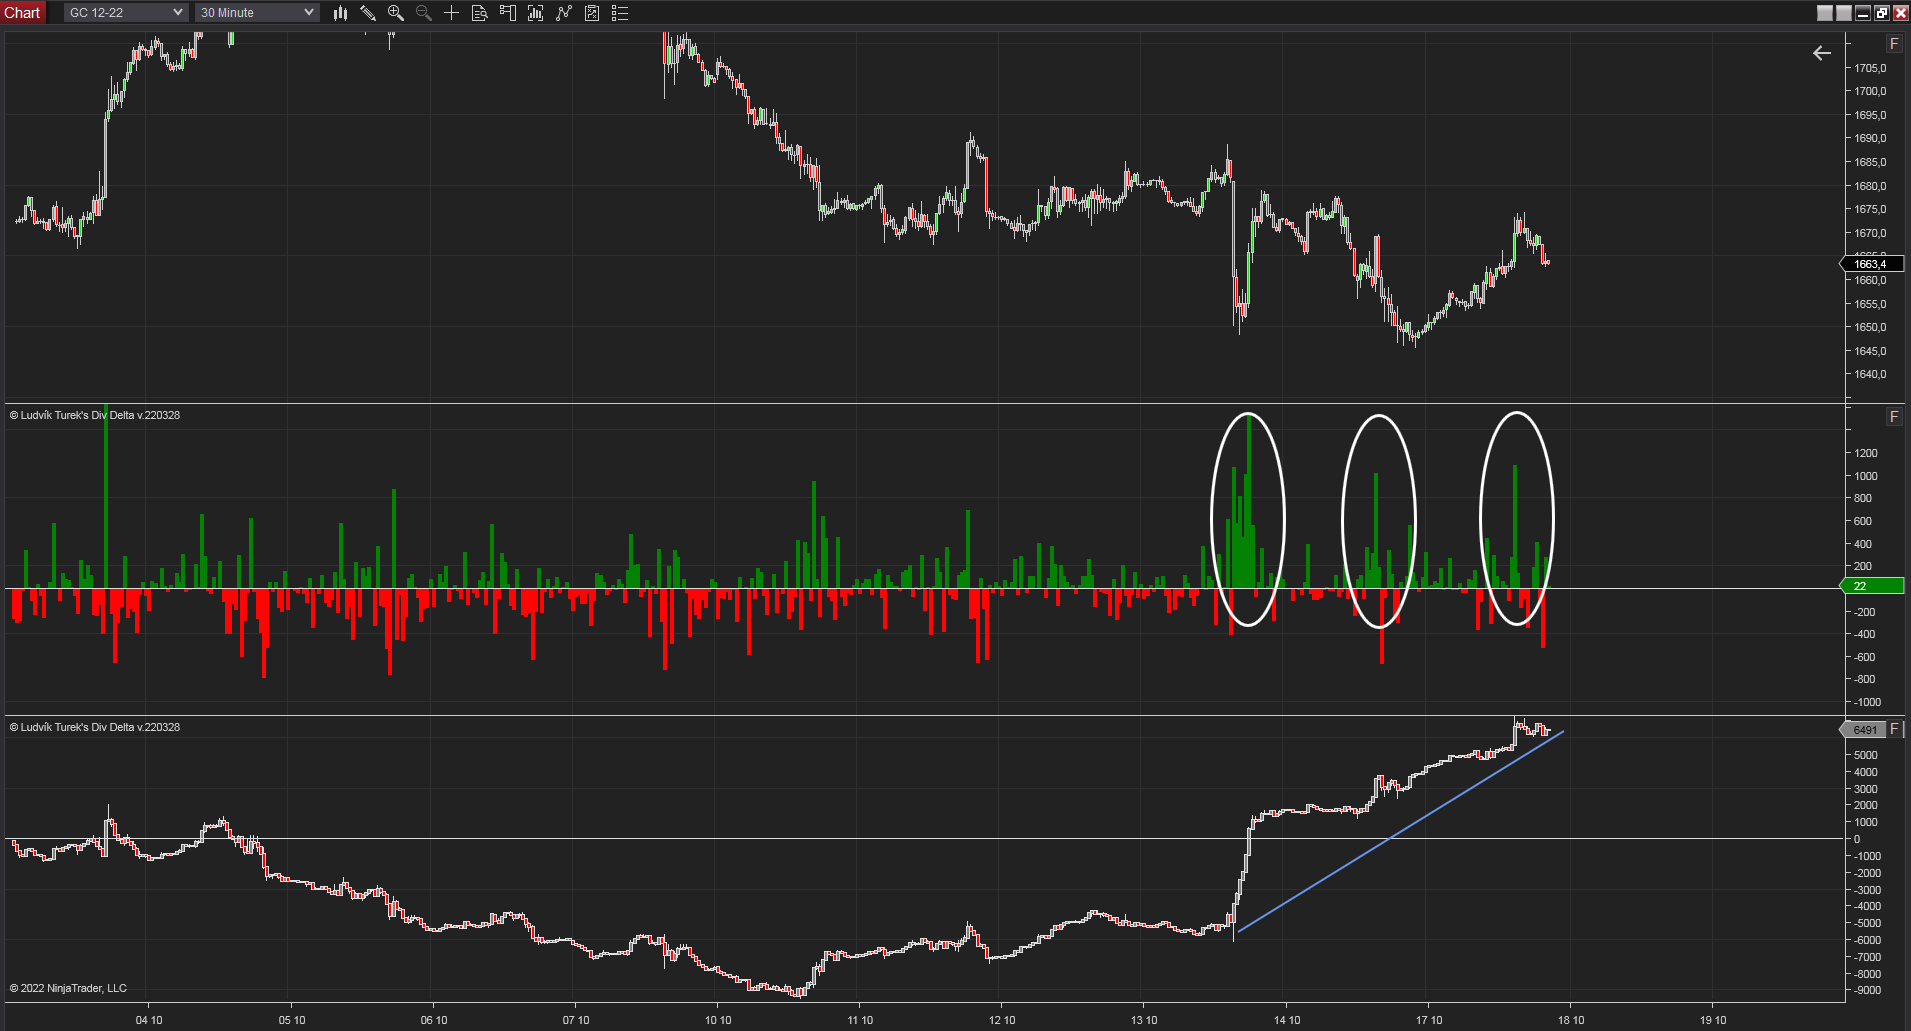 30 minutes chart of GC (Gold Futures), Divergence of the cumulative delta. Source: Author's analysis